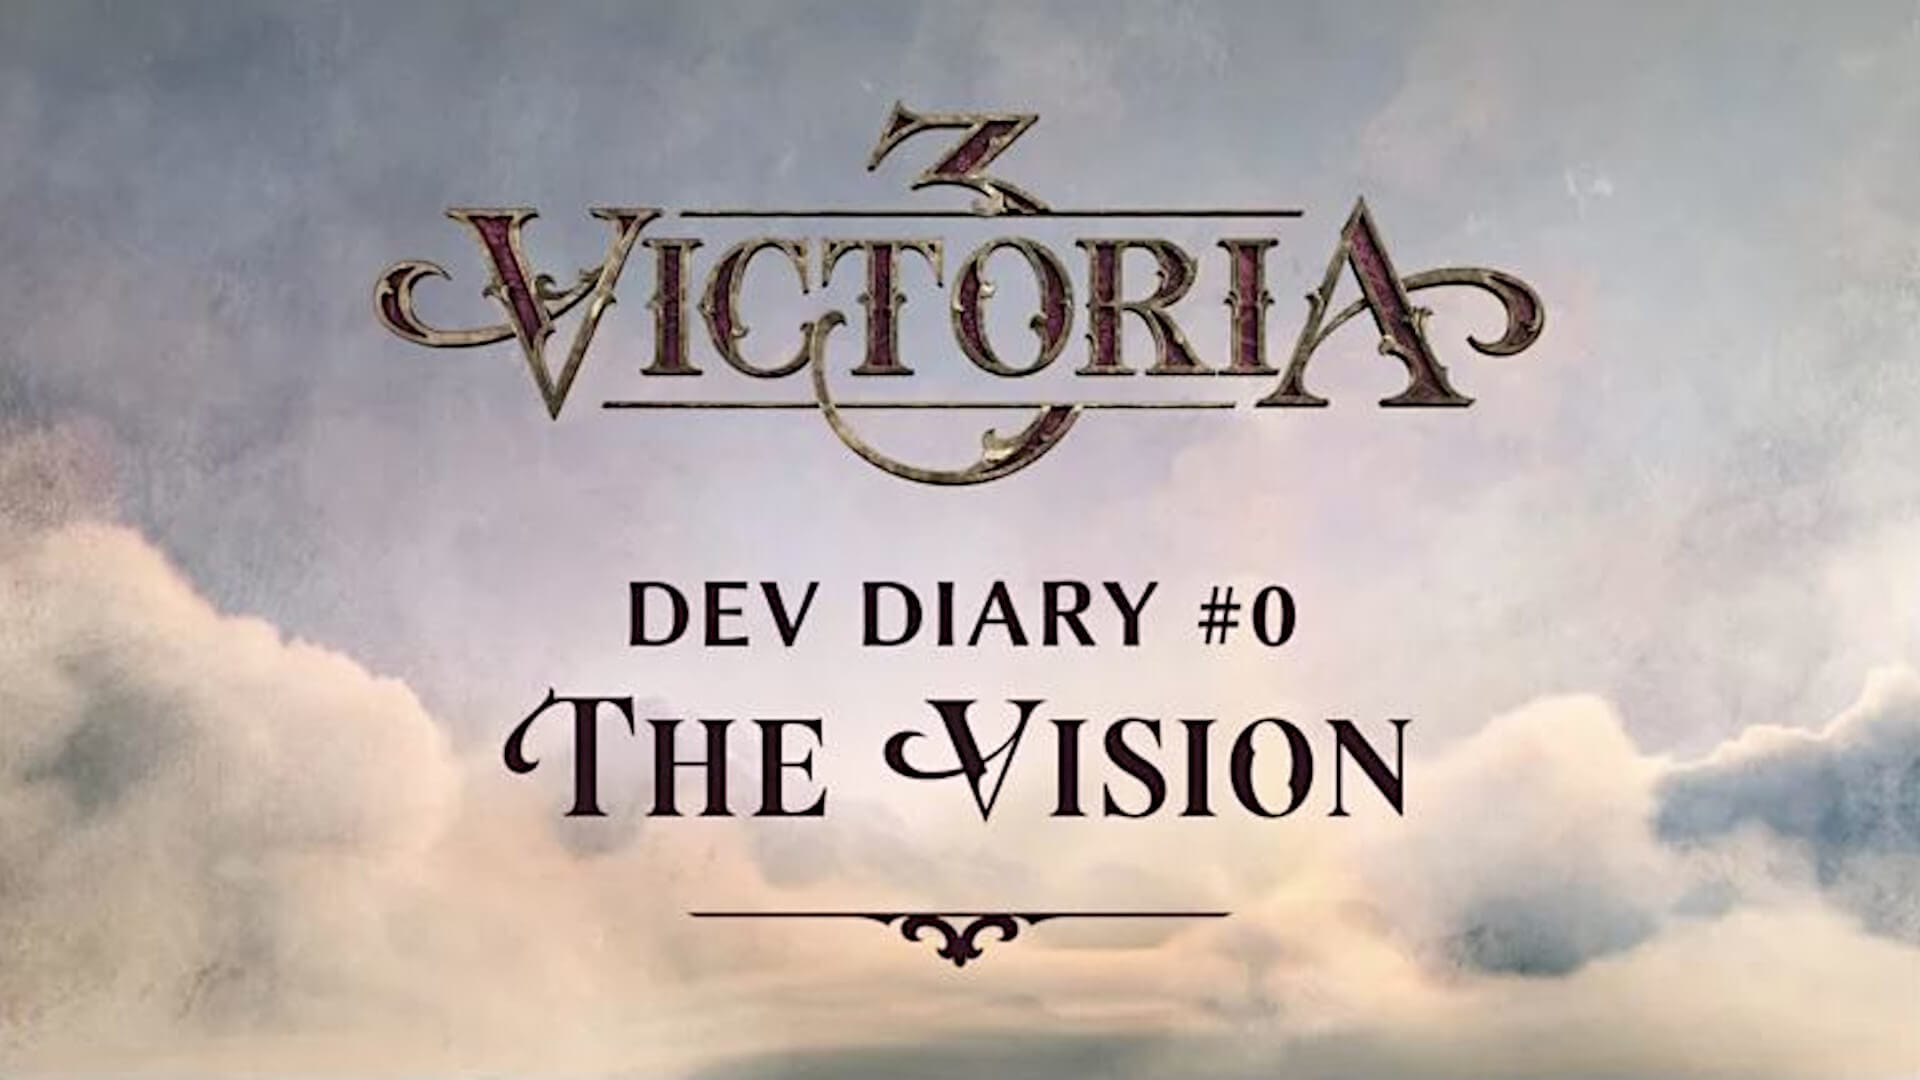 VICTORIA 3 LEAK ON THE FORUMS : r/paradoxplaza